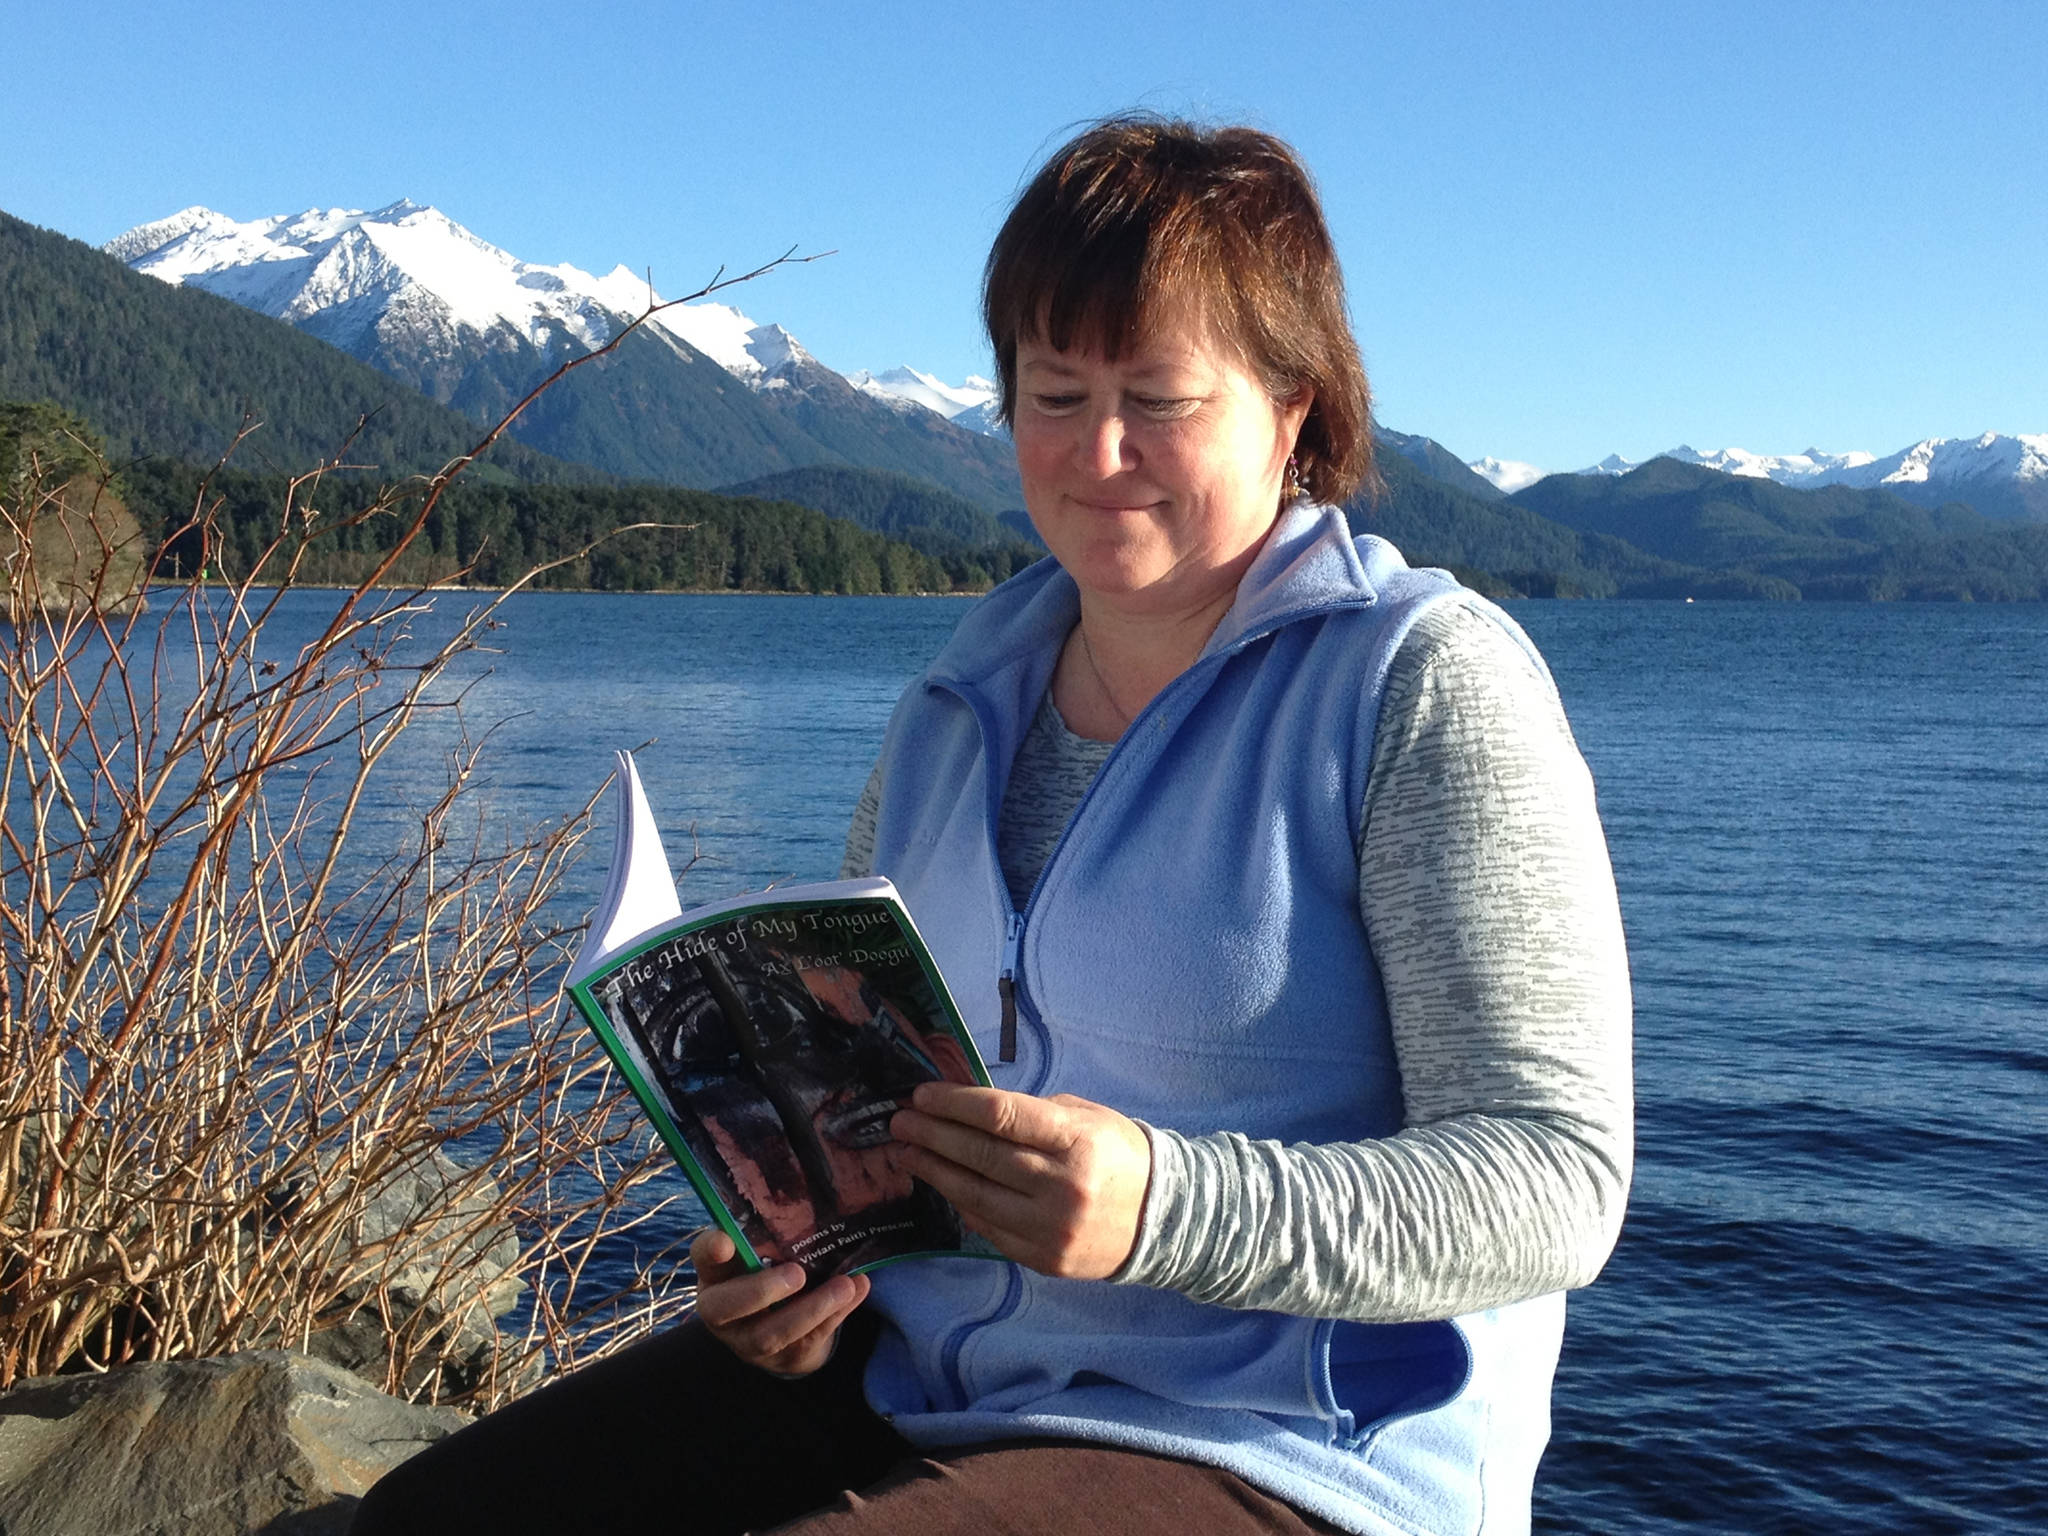 Author Vivian Faith Prescott reads from The Hide of My Tongue, or, in Tlingit, Ax L’&